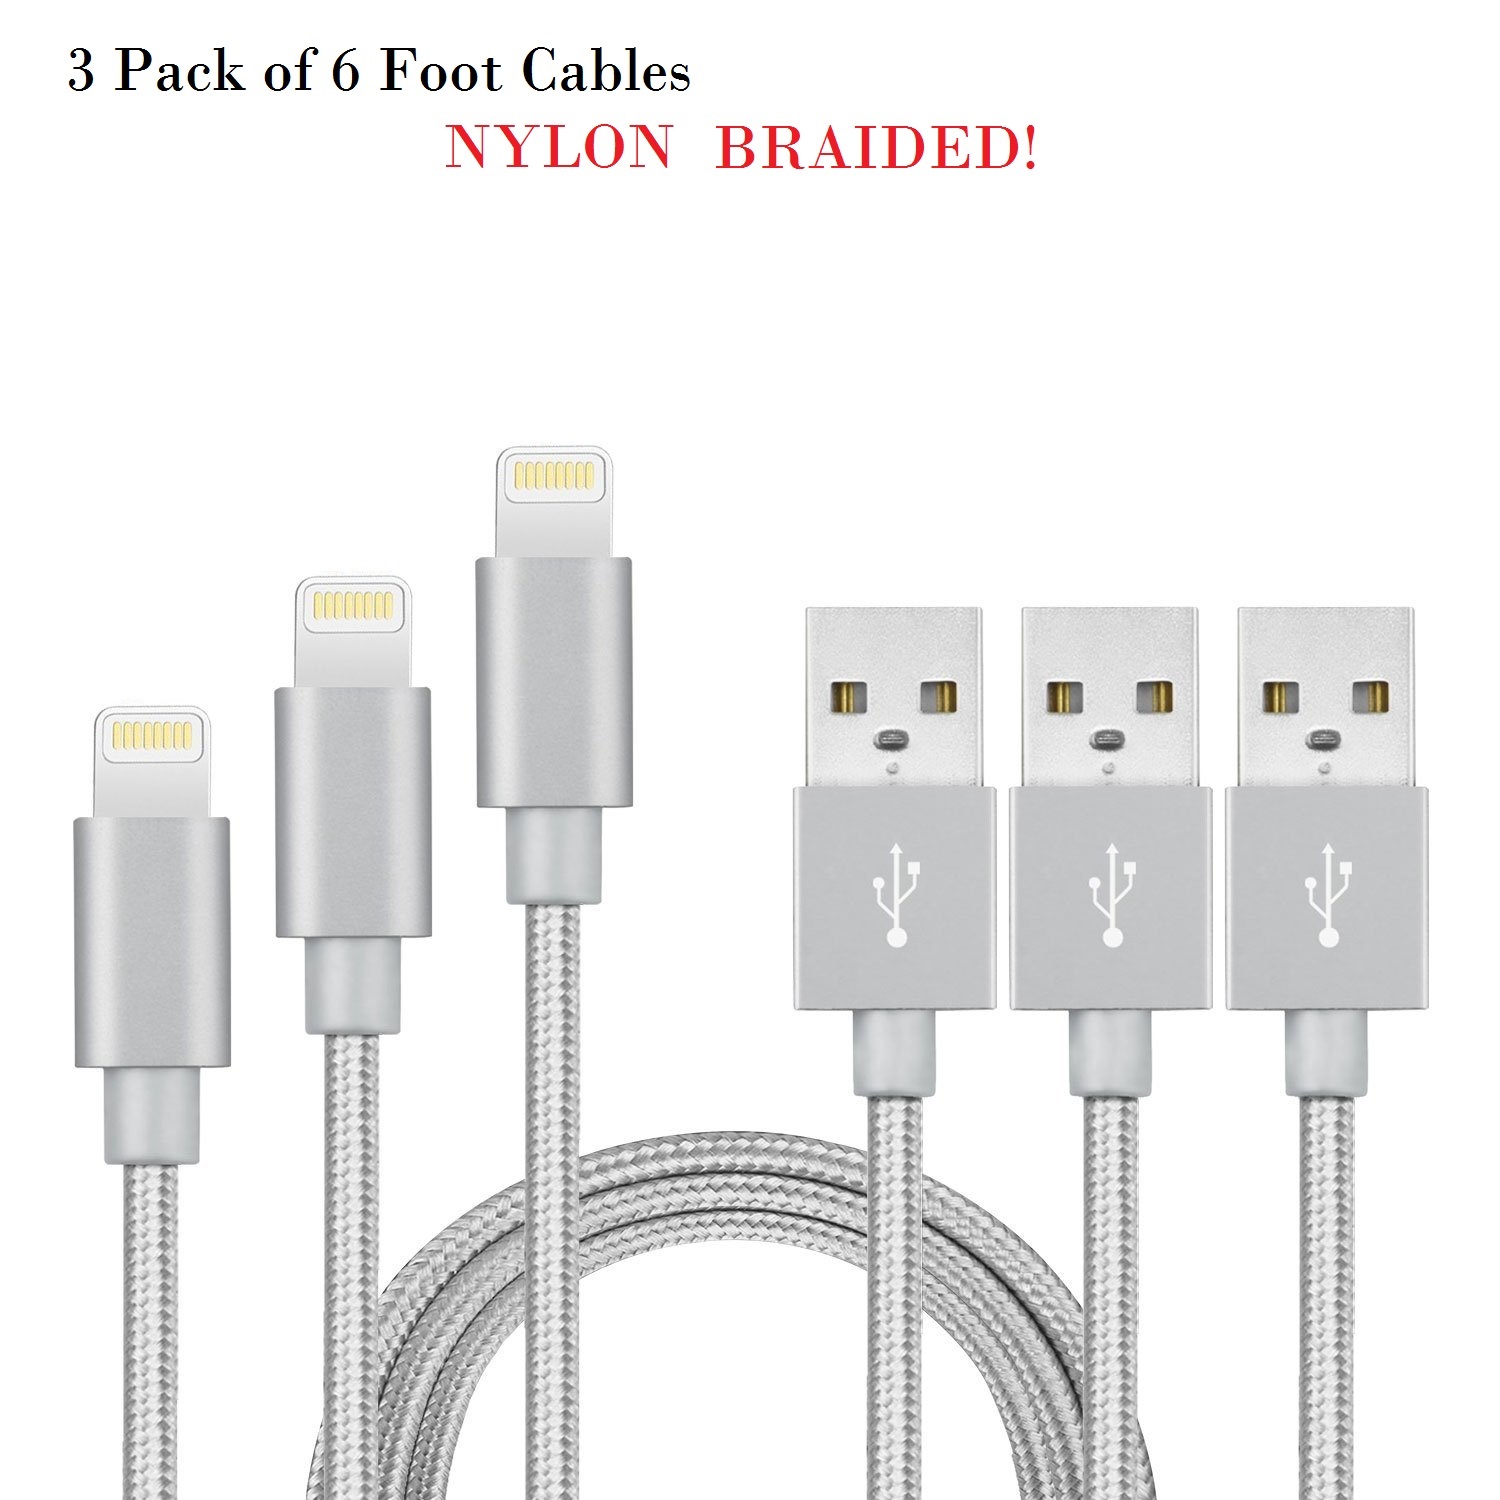 (3 Pack) 6 foot lightning charging cable for Iphone and Ipad devices - image 1 of 4